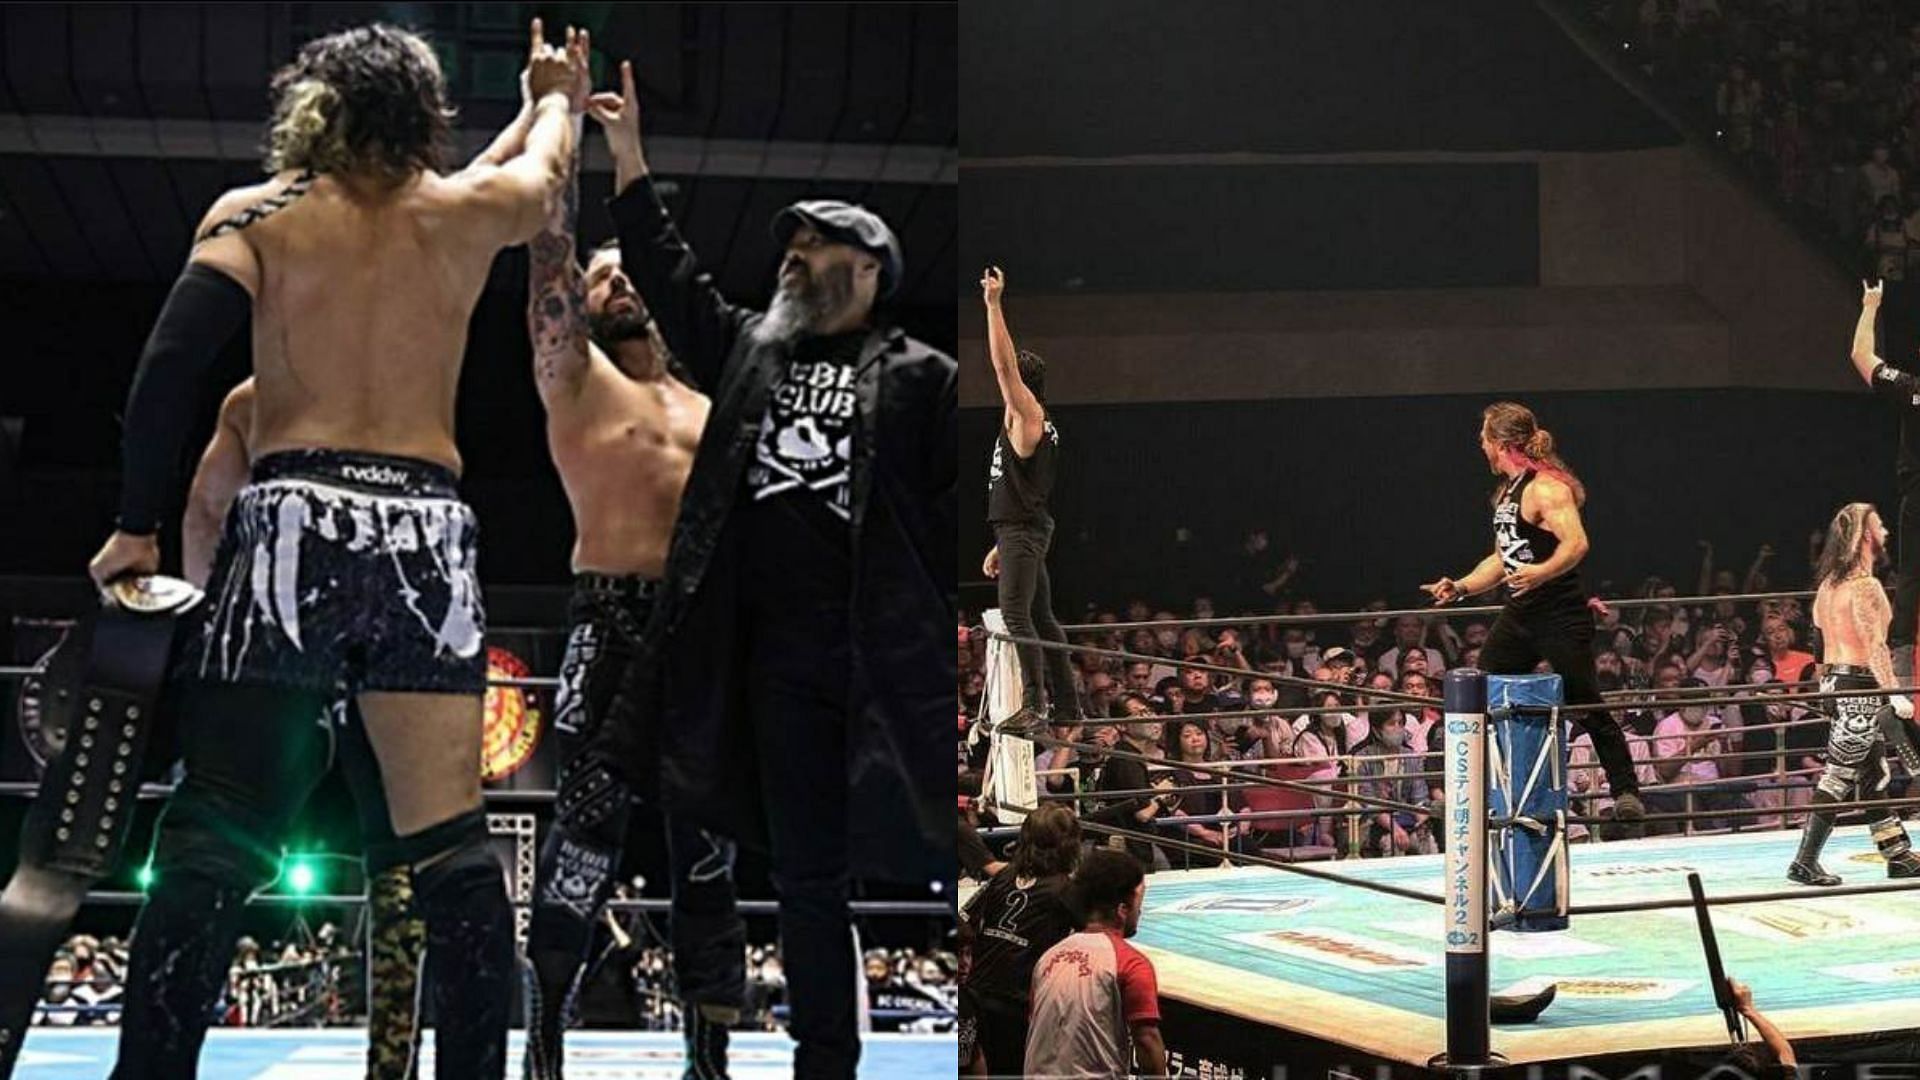 The Bullet Club added three new members to the group